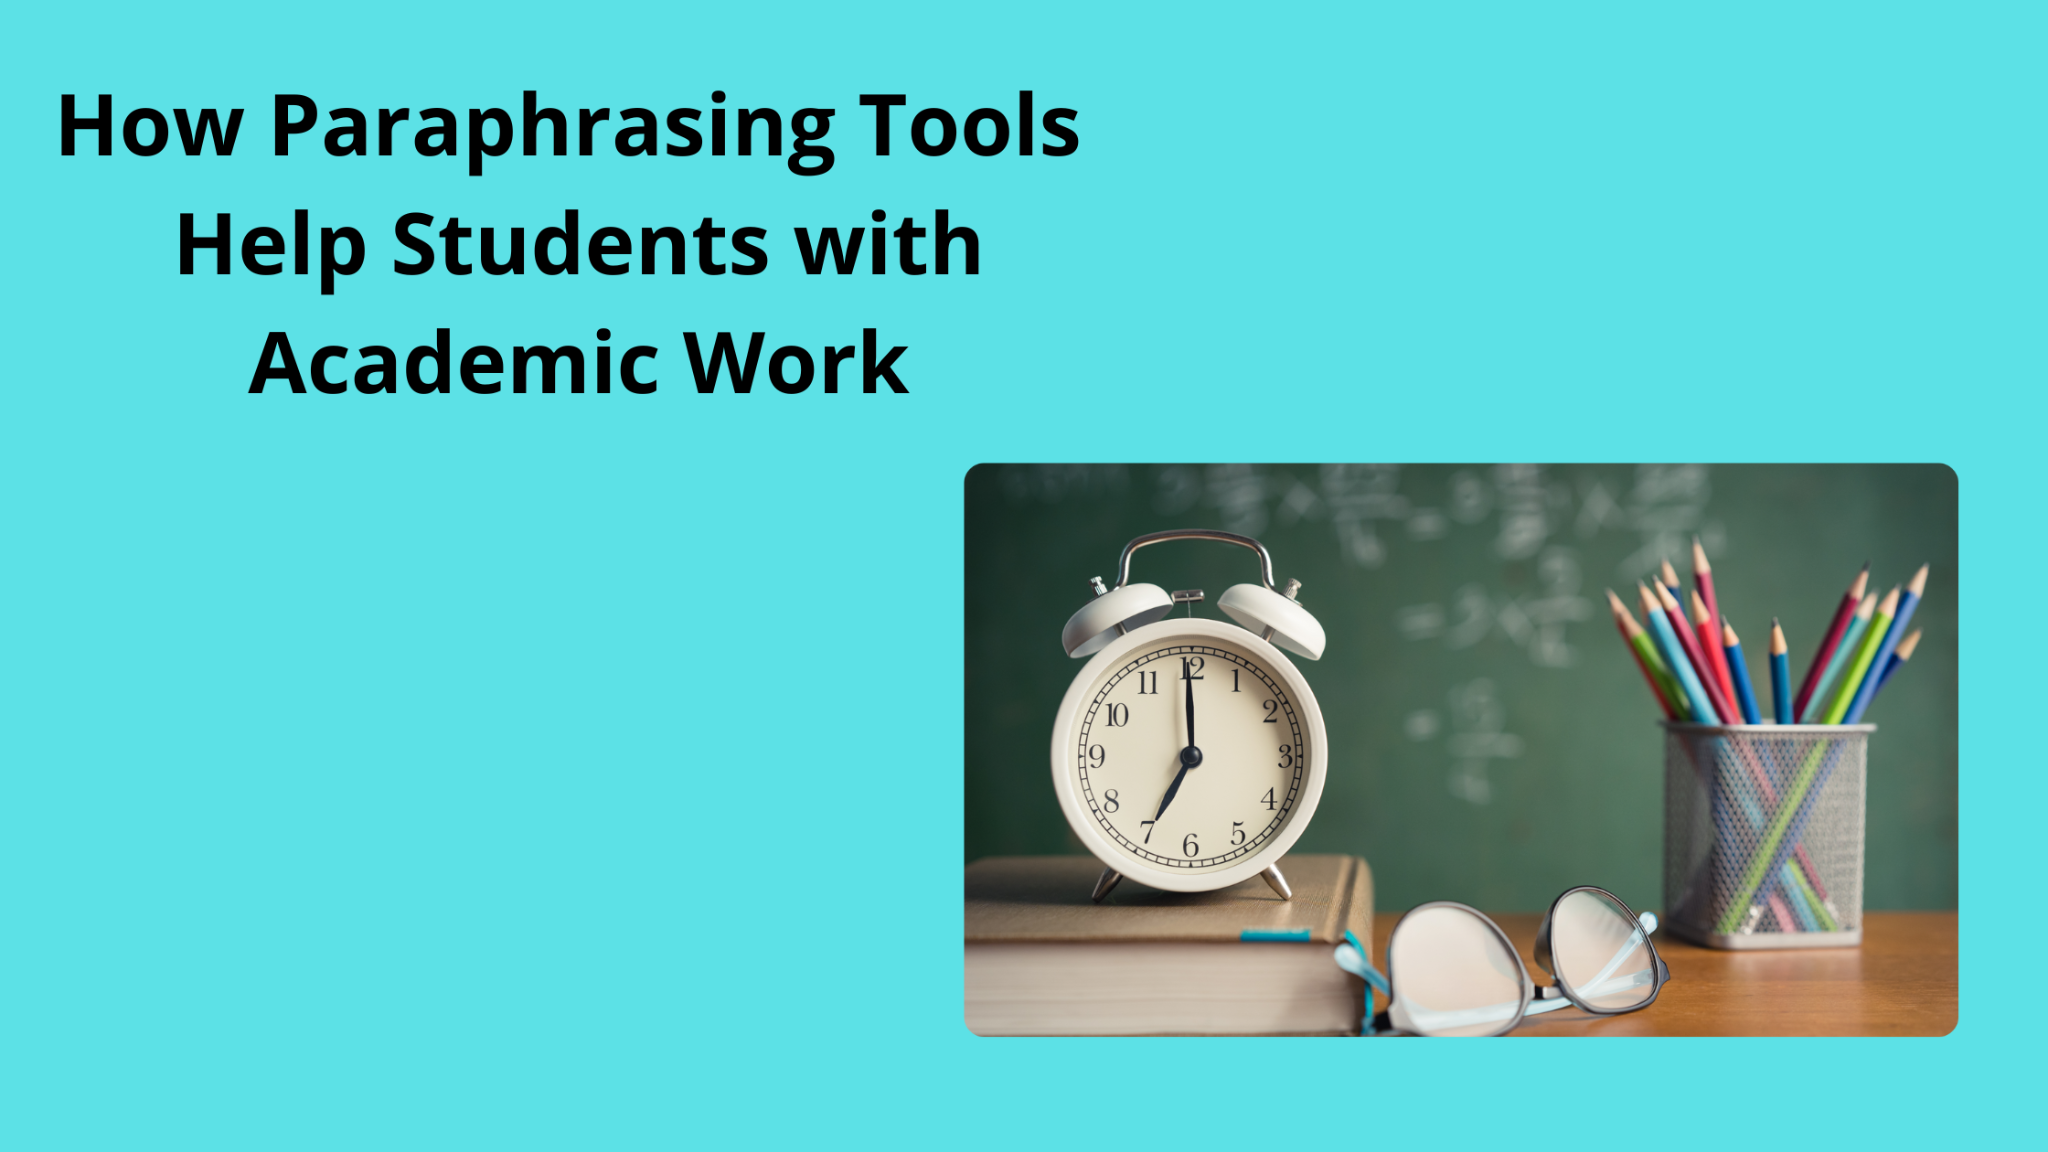 How Paraphrasing Tools Help Students with Academic Work?